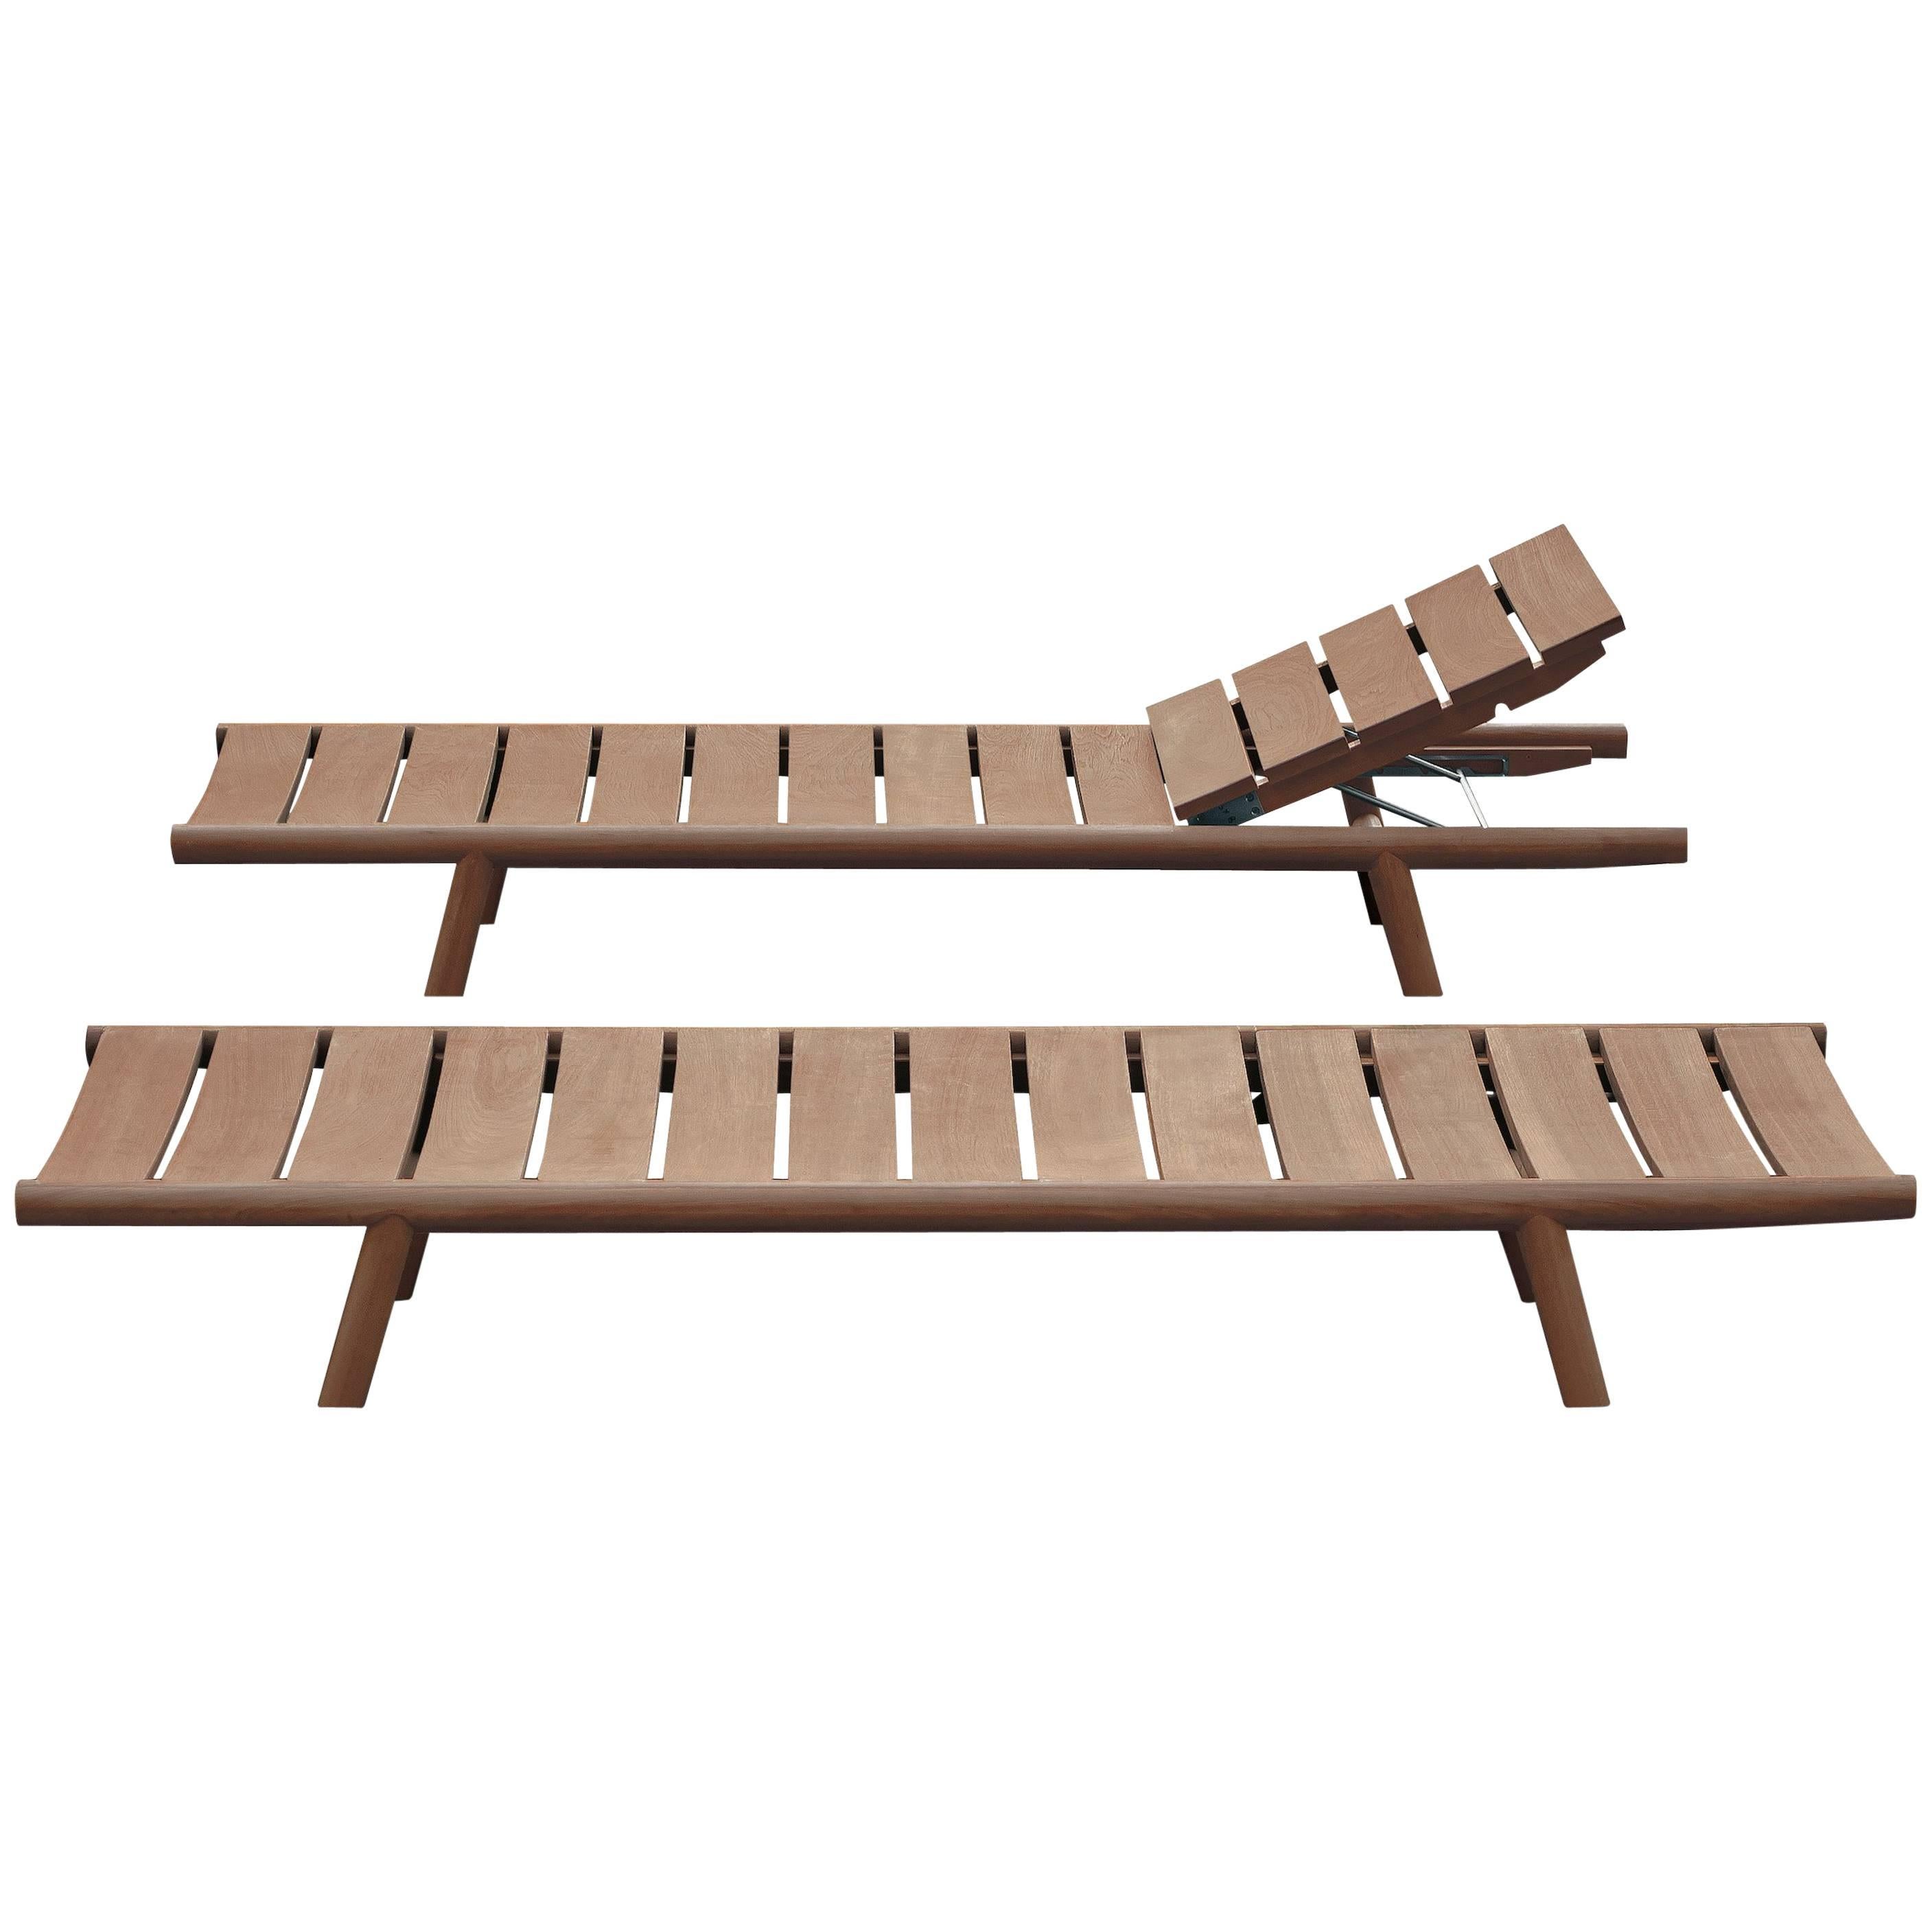 Roda Orson Adjustable Sunlounger for Outdoor Use in Teak with Optional Cushion For Sale